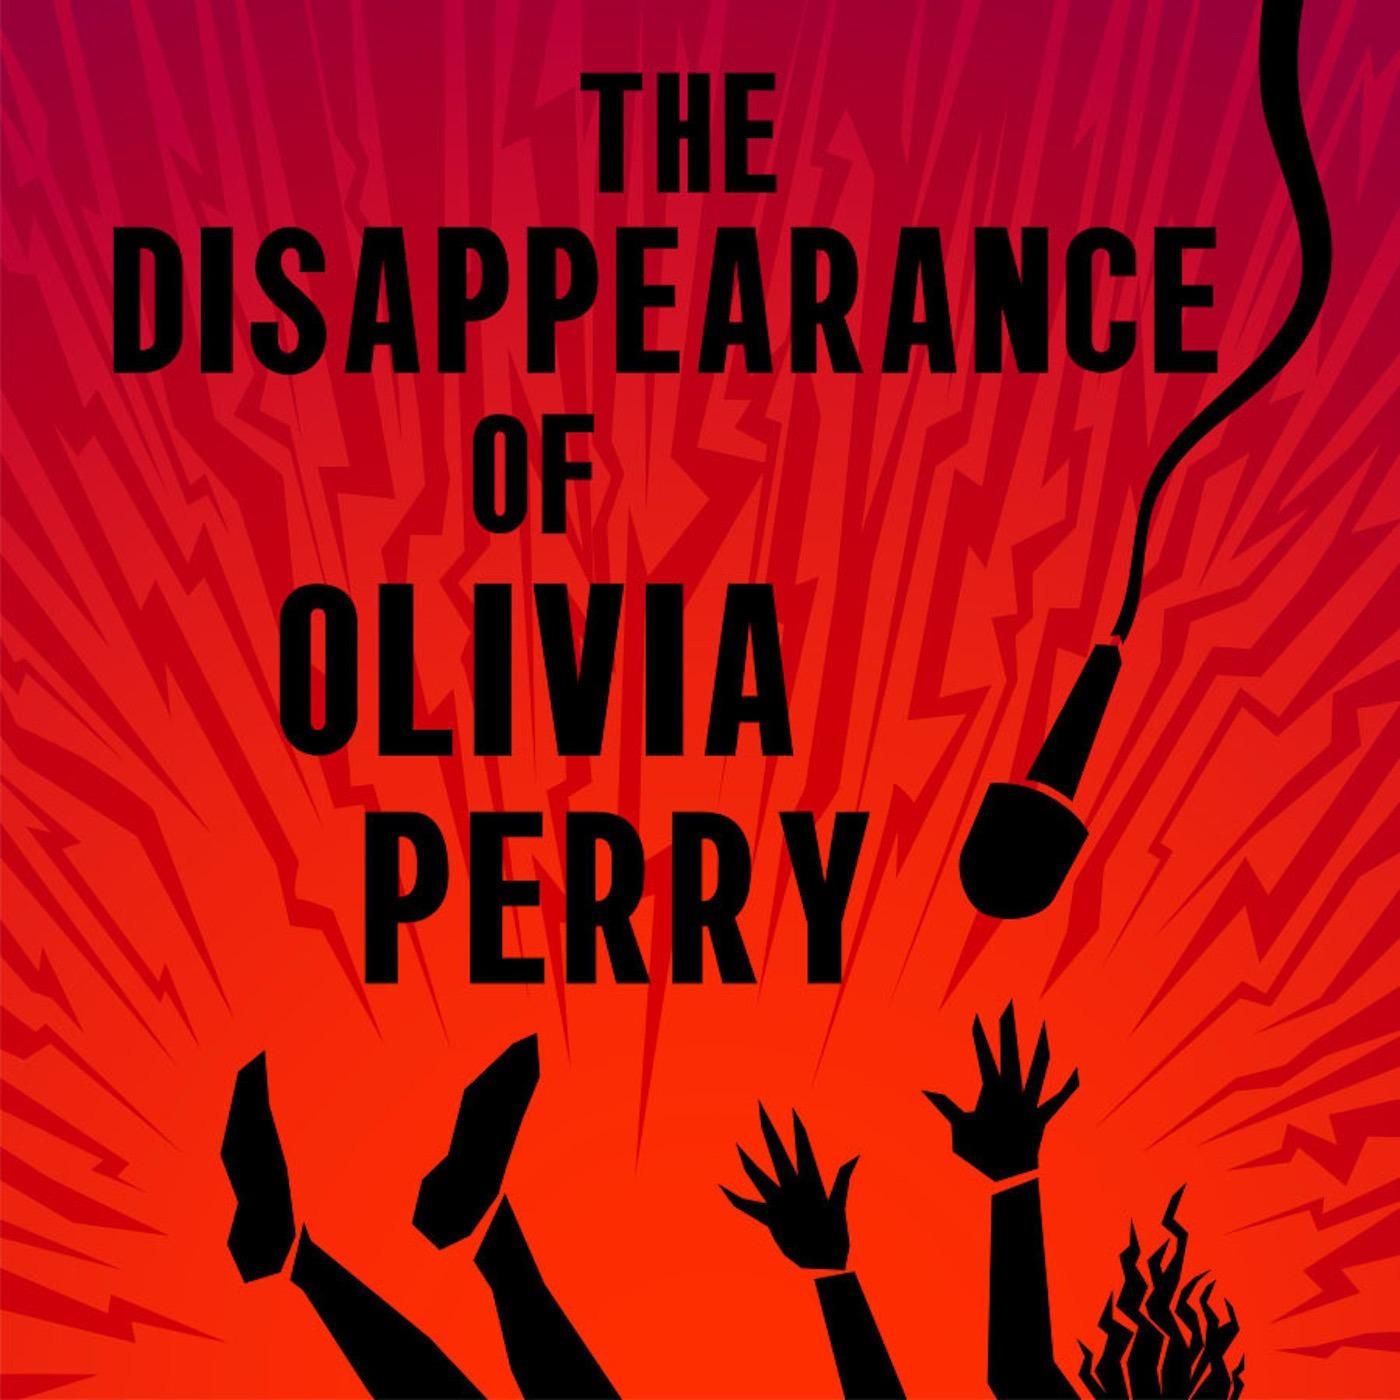 The Disappearance of Olivia Perry